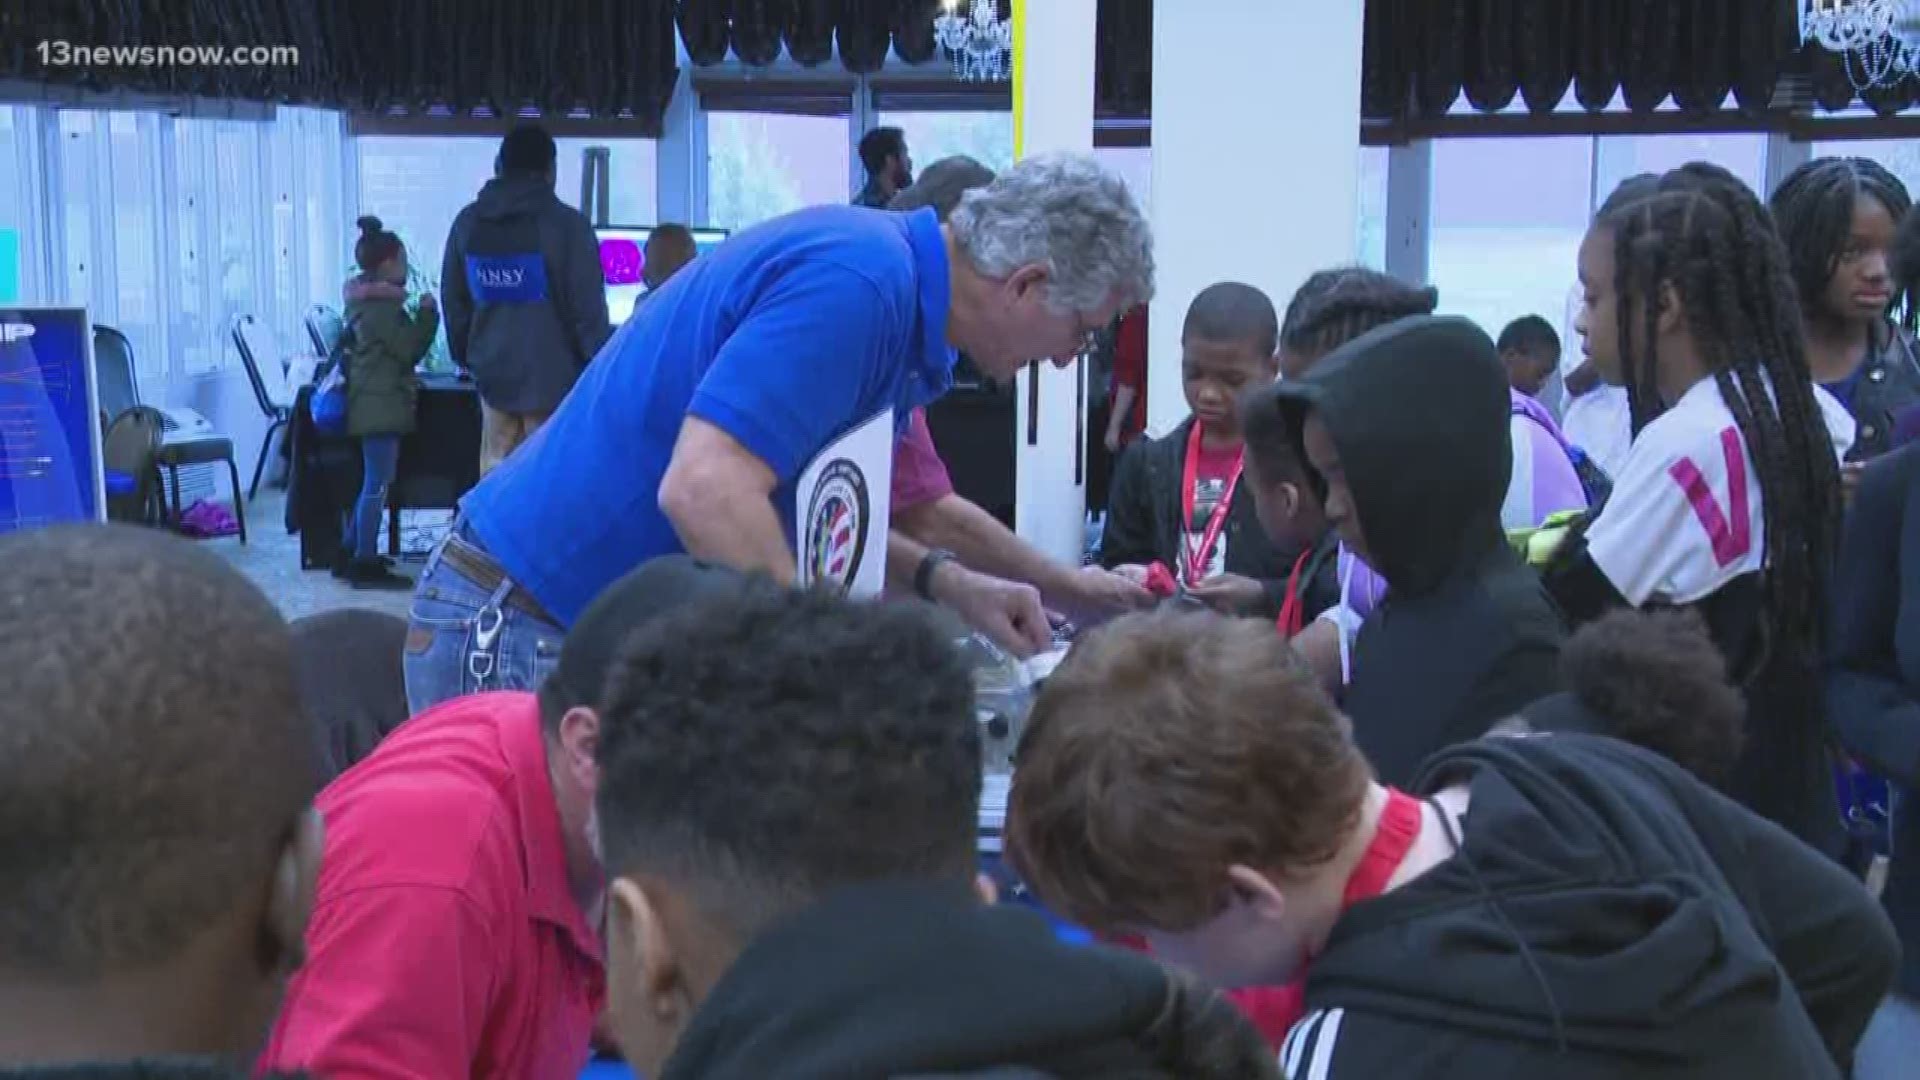 Norfolk Naval Shipyard hoped to inspire students with a STEM workshop. Hundreds of Portsmouth 5th and 6th graders attended the event.